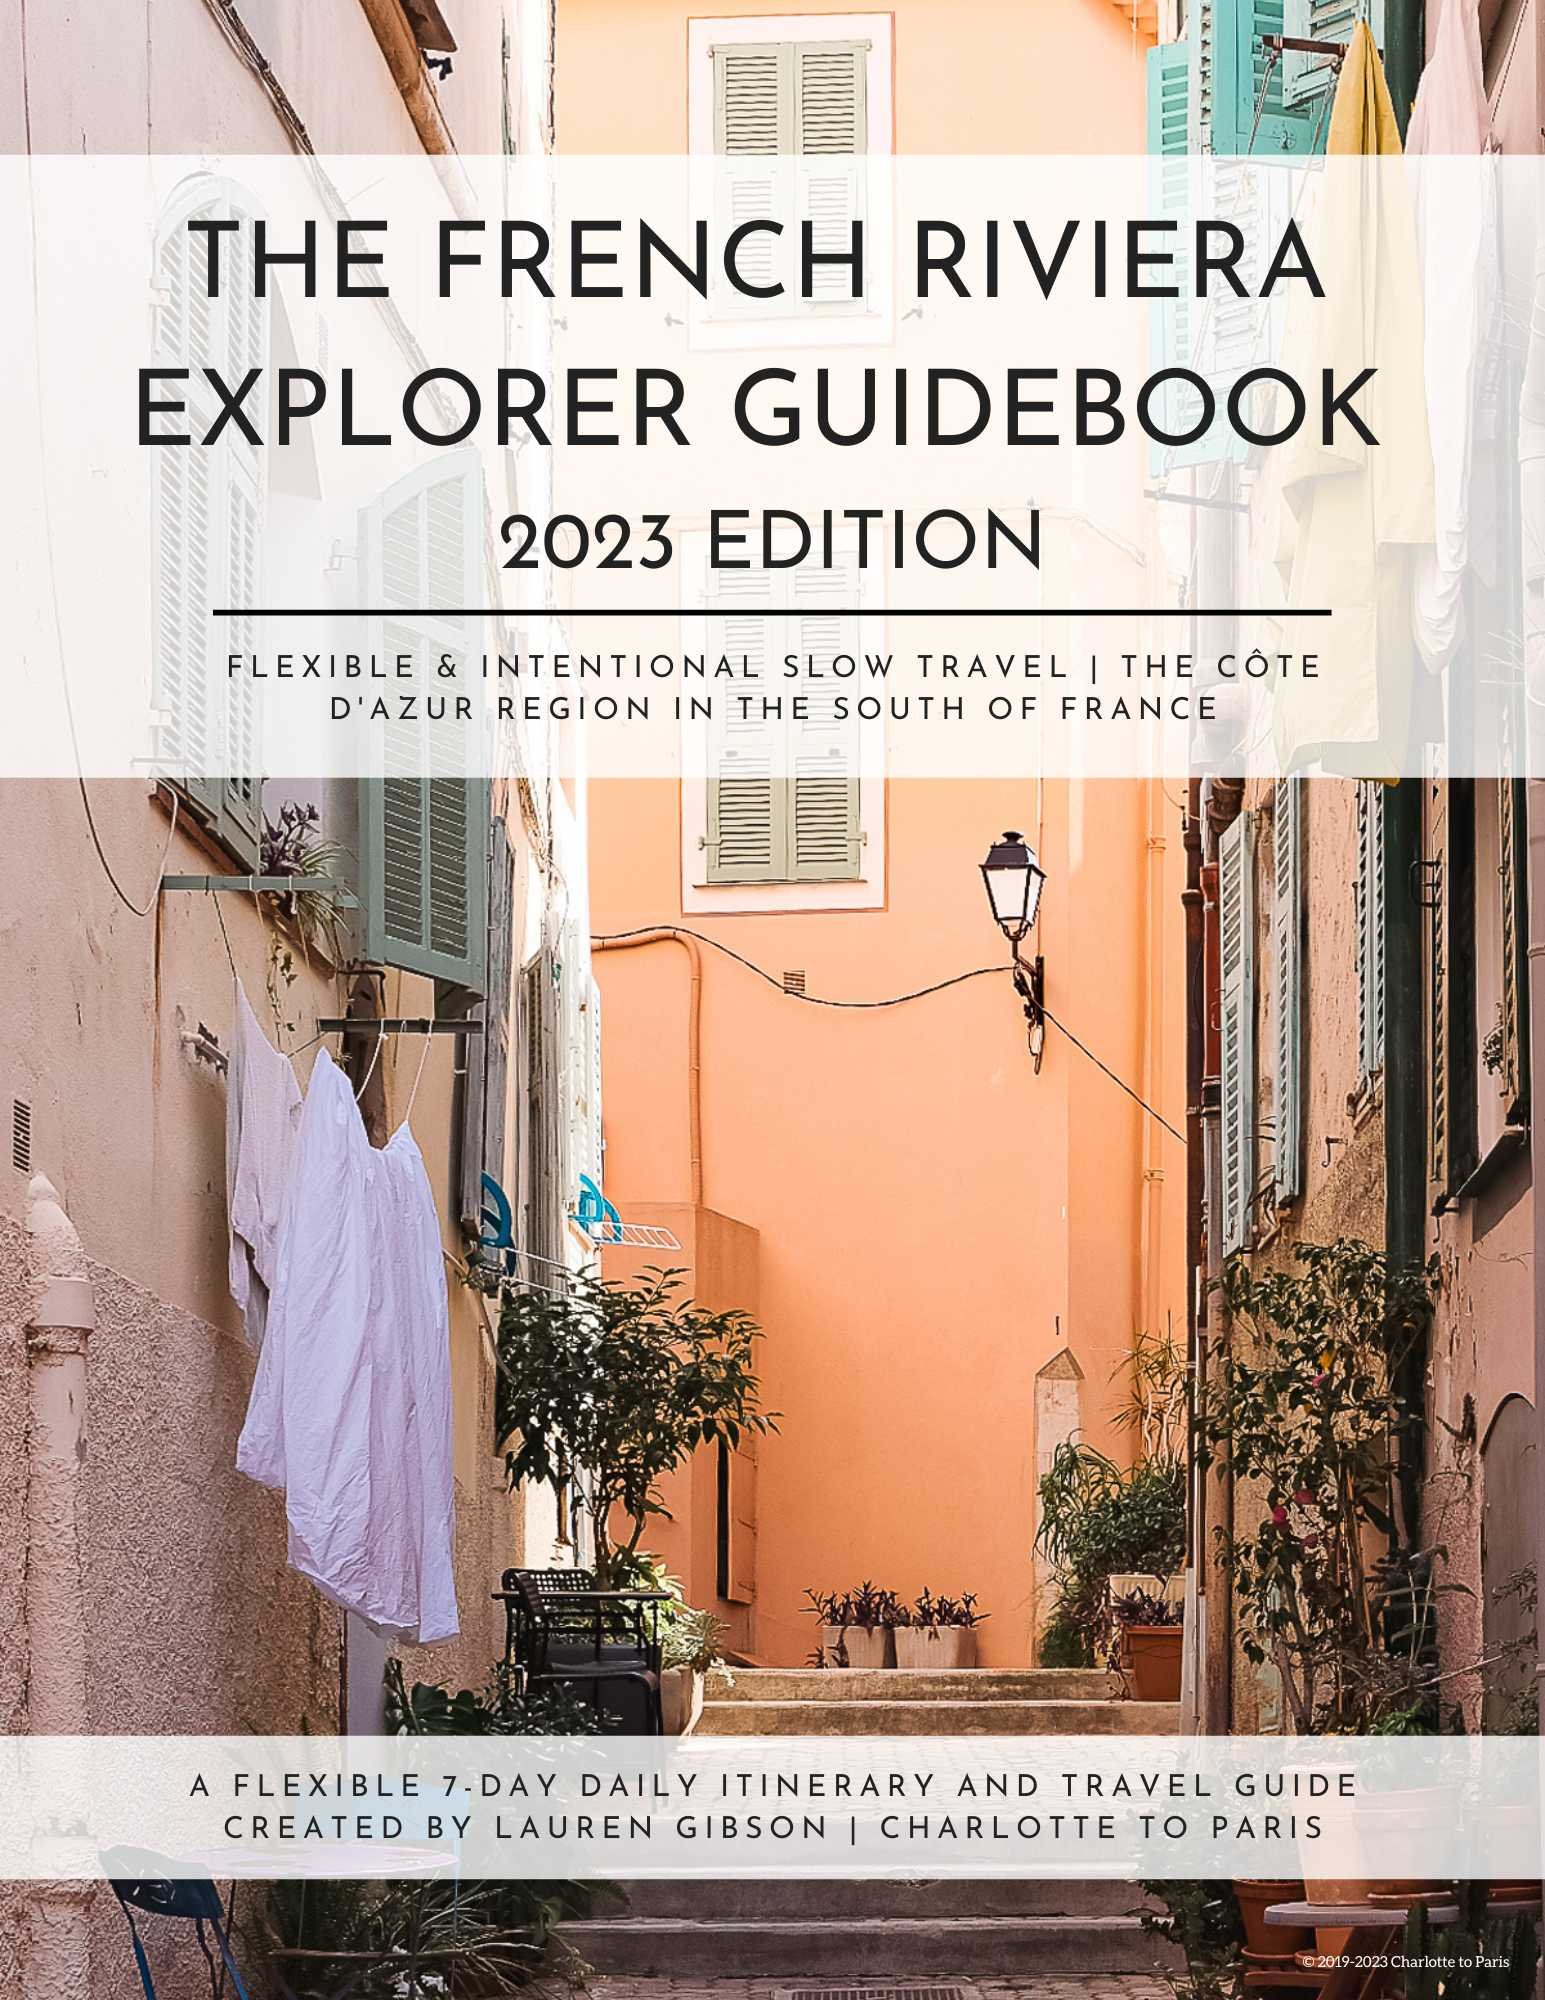 South of France Explorer Guidebook - 2023 Edition v1 - The Frenc